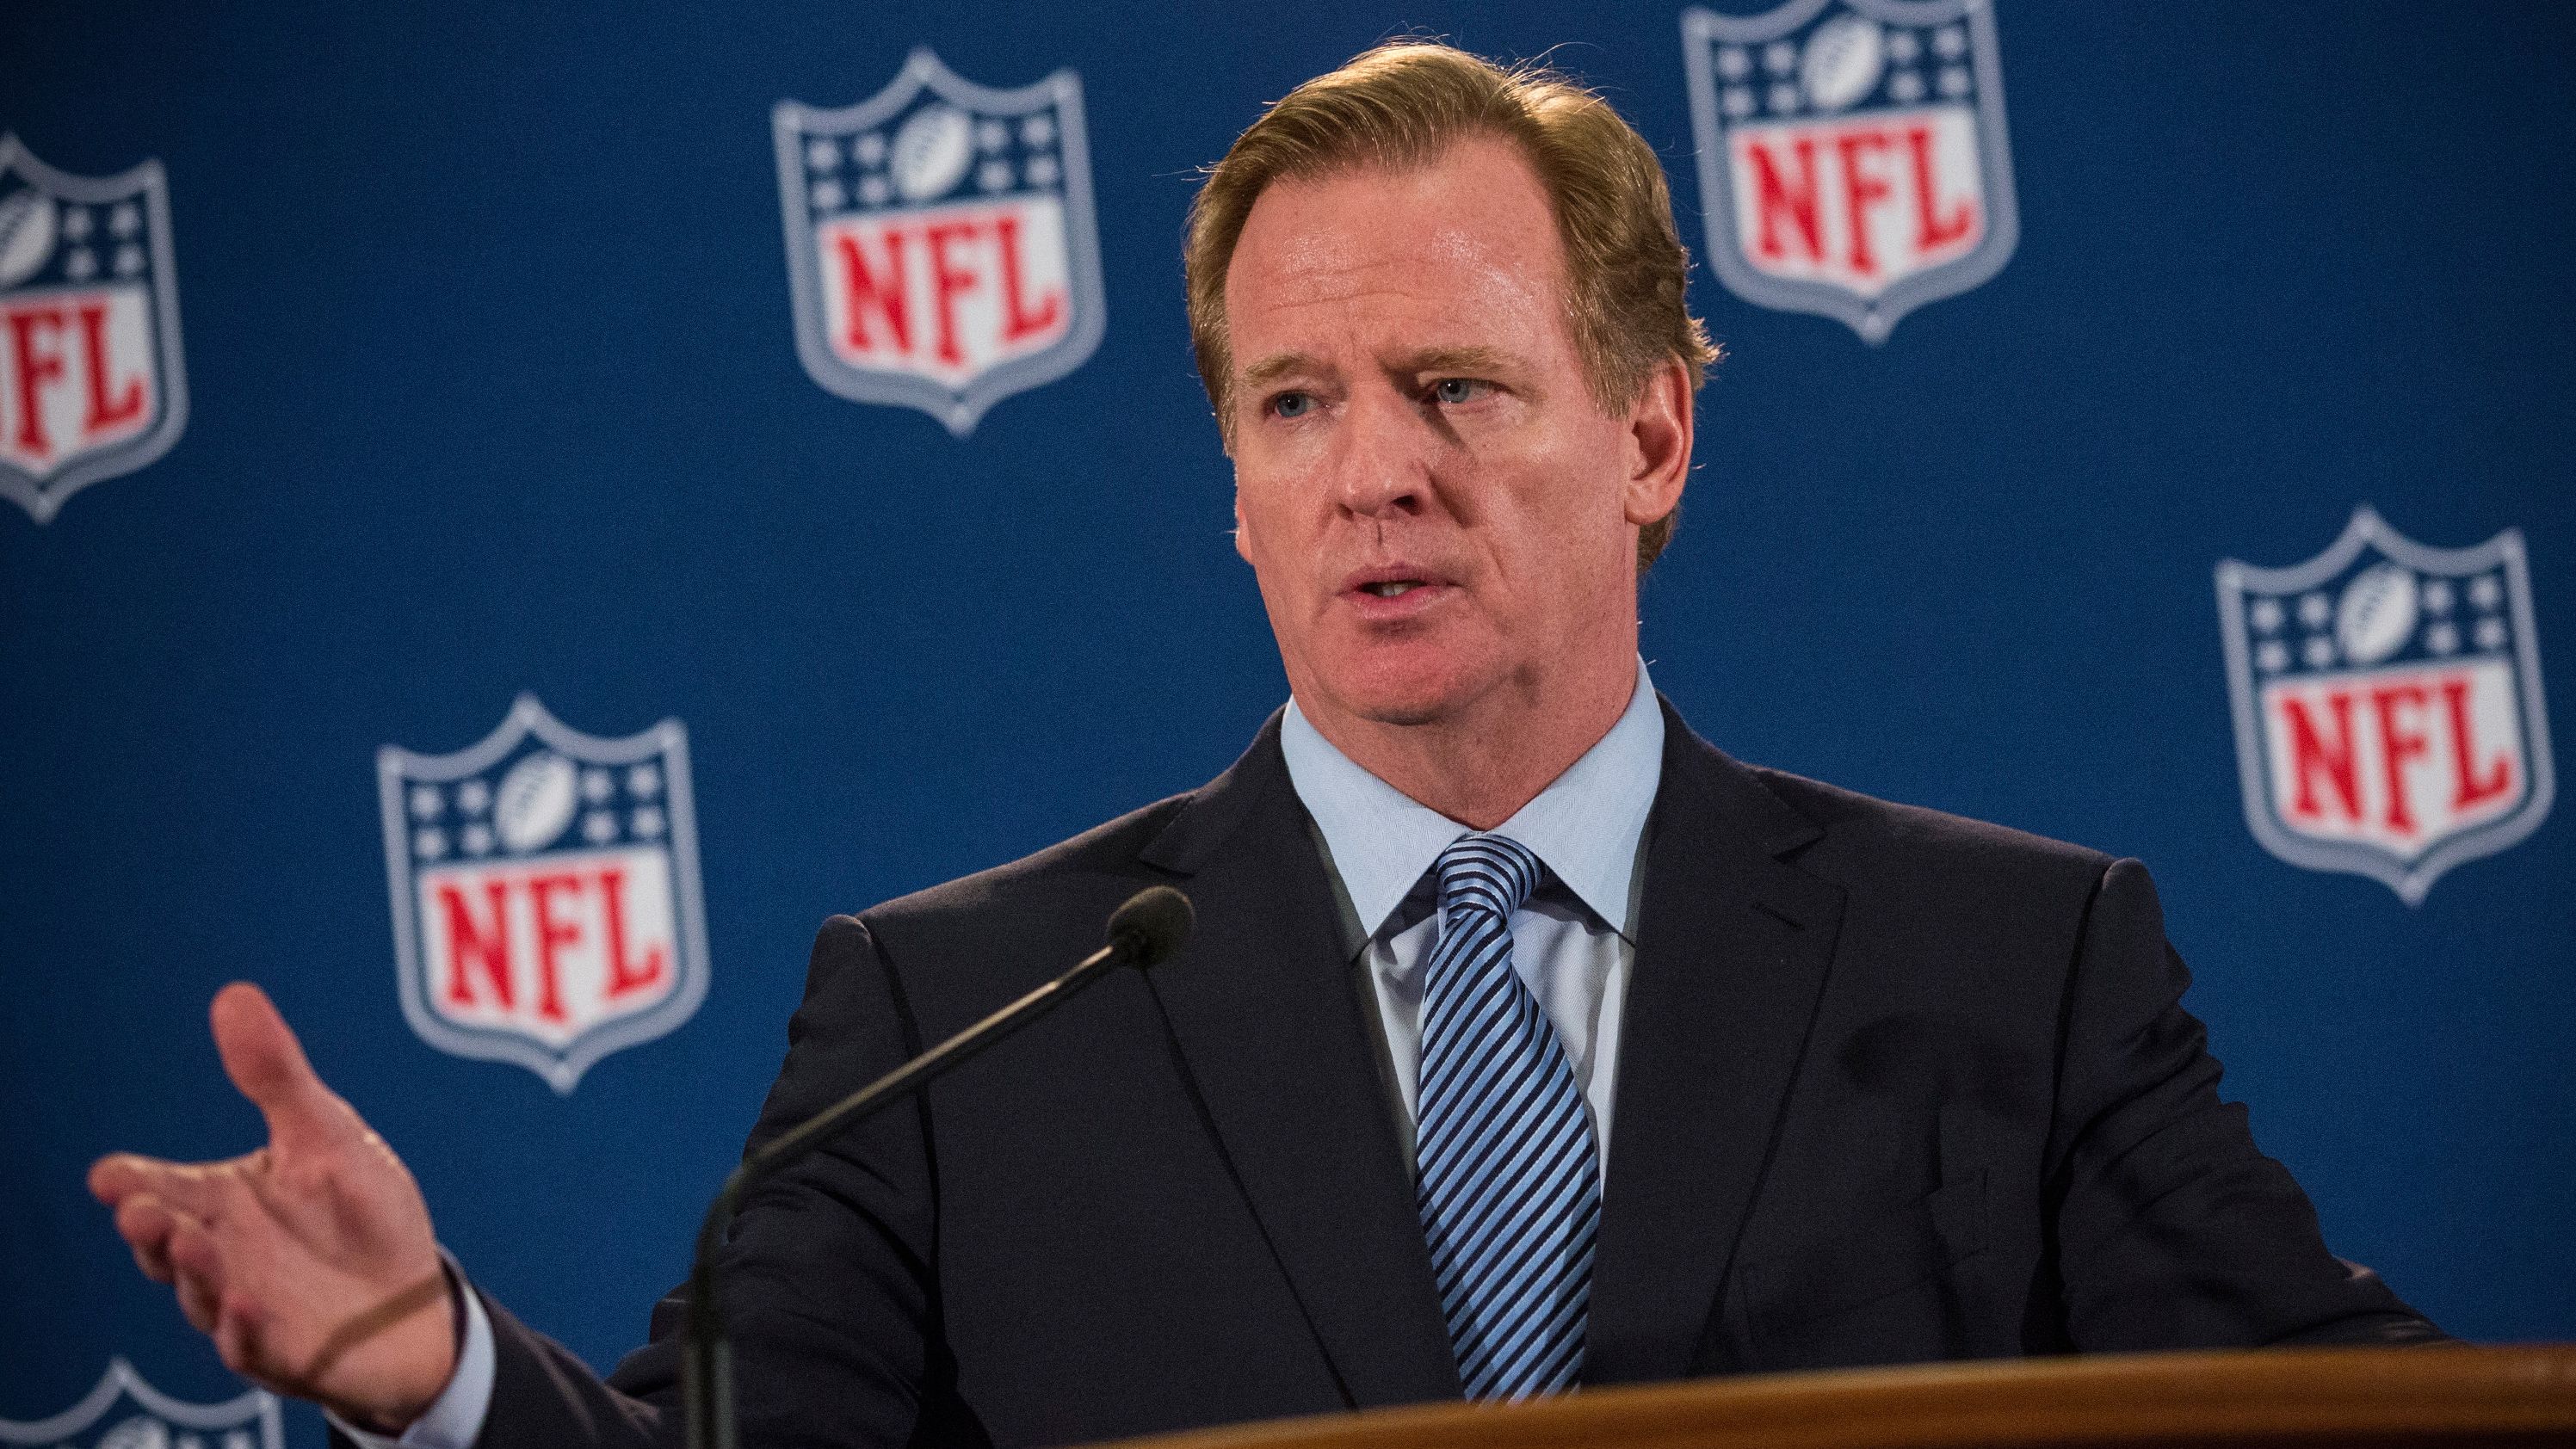 NFL Commissioner Roger Goodell says the league is making a commitment to women in executive jobs.